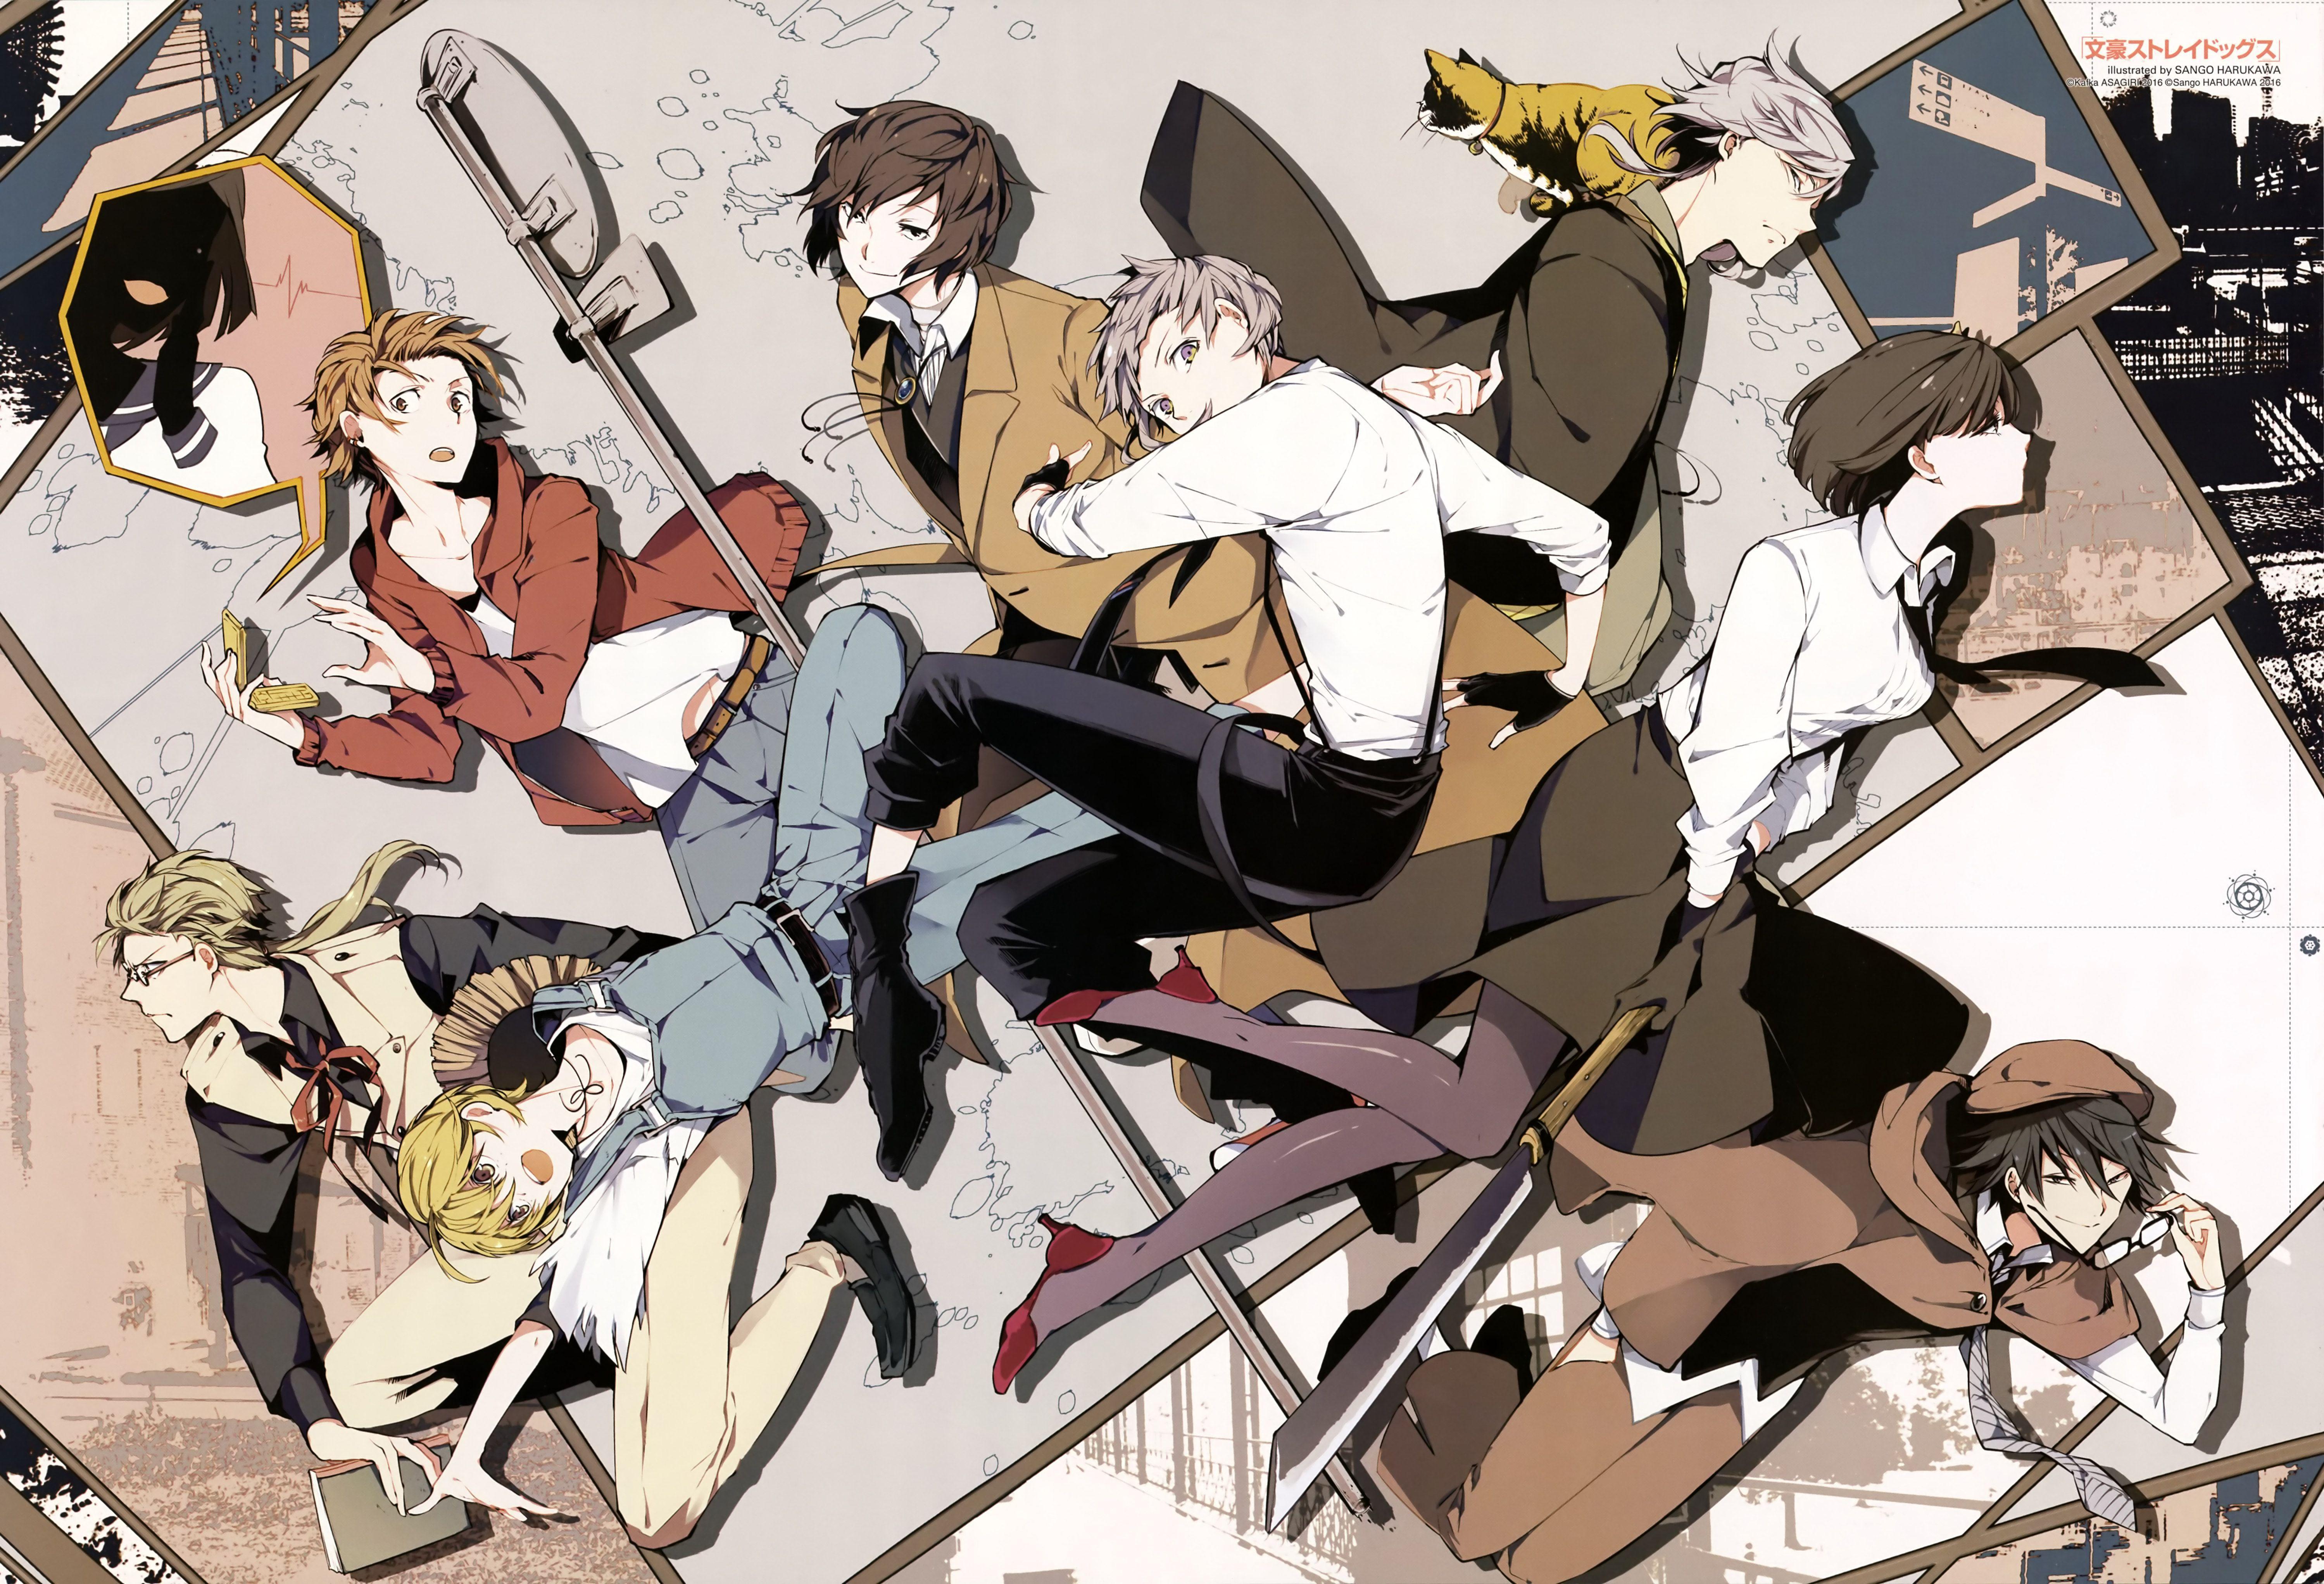 Bungo Stray Dogs Wallpaper : Bungo Stray Dogs Wallpapers Posted By John Sellers : See more ideas about bungo stray dogs, stray dog, stray.